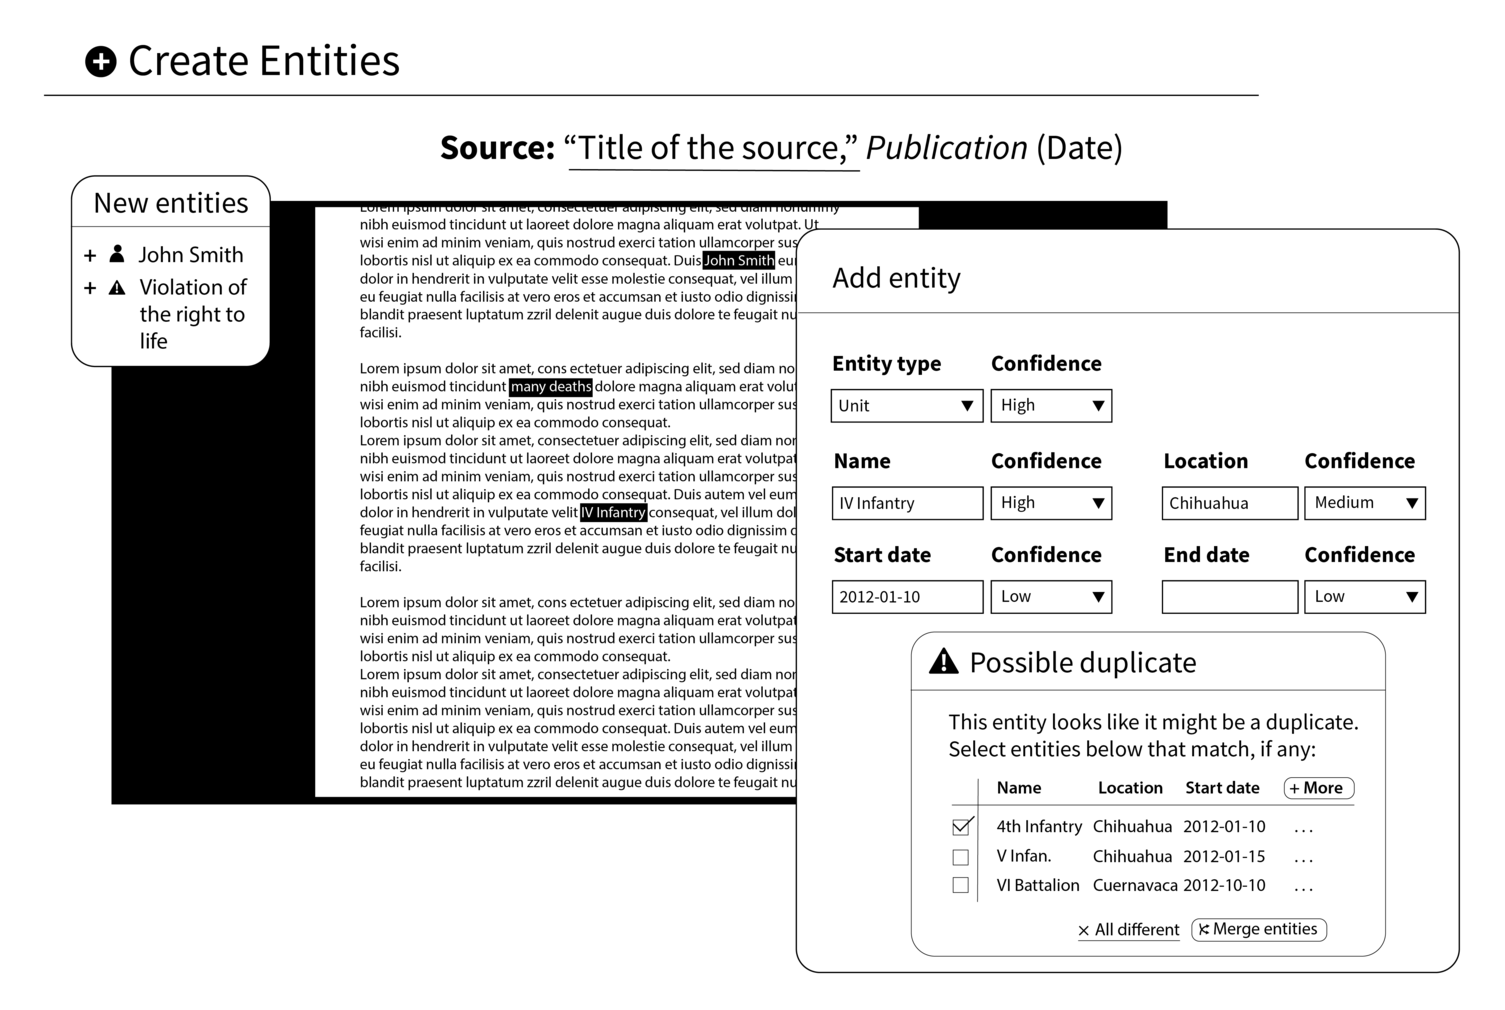 An imagined interface for creating entities in a machine assisted dossier.